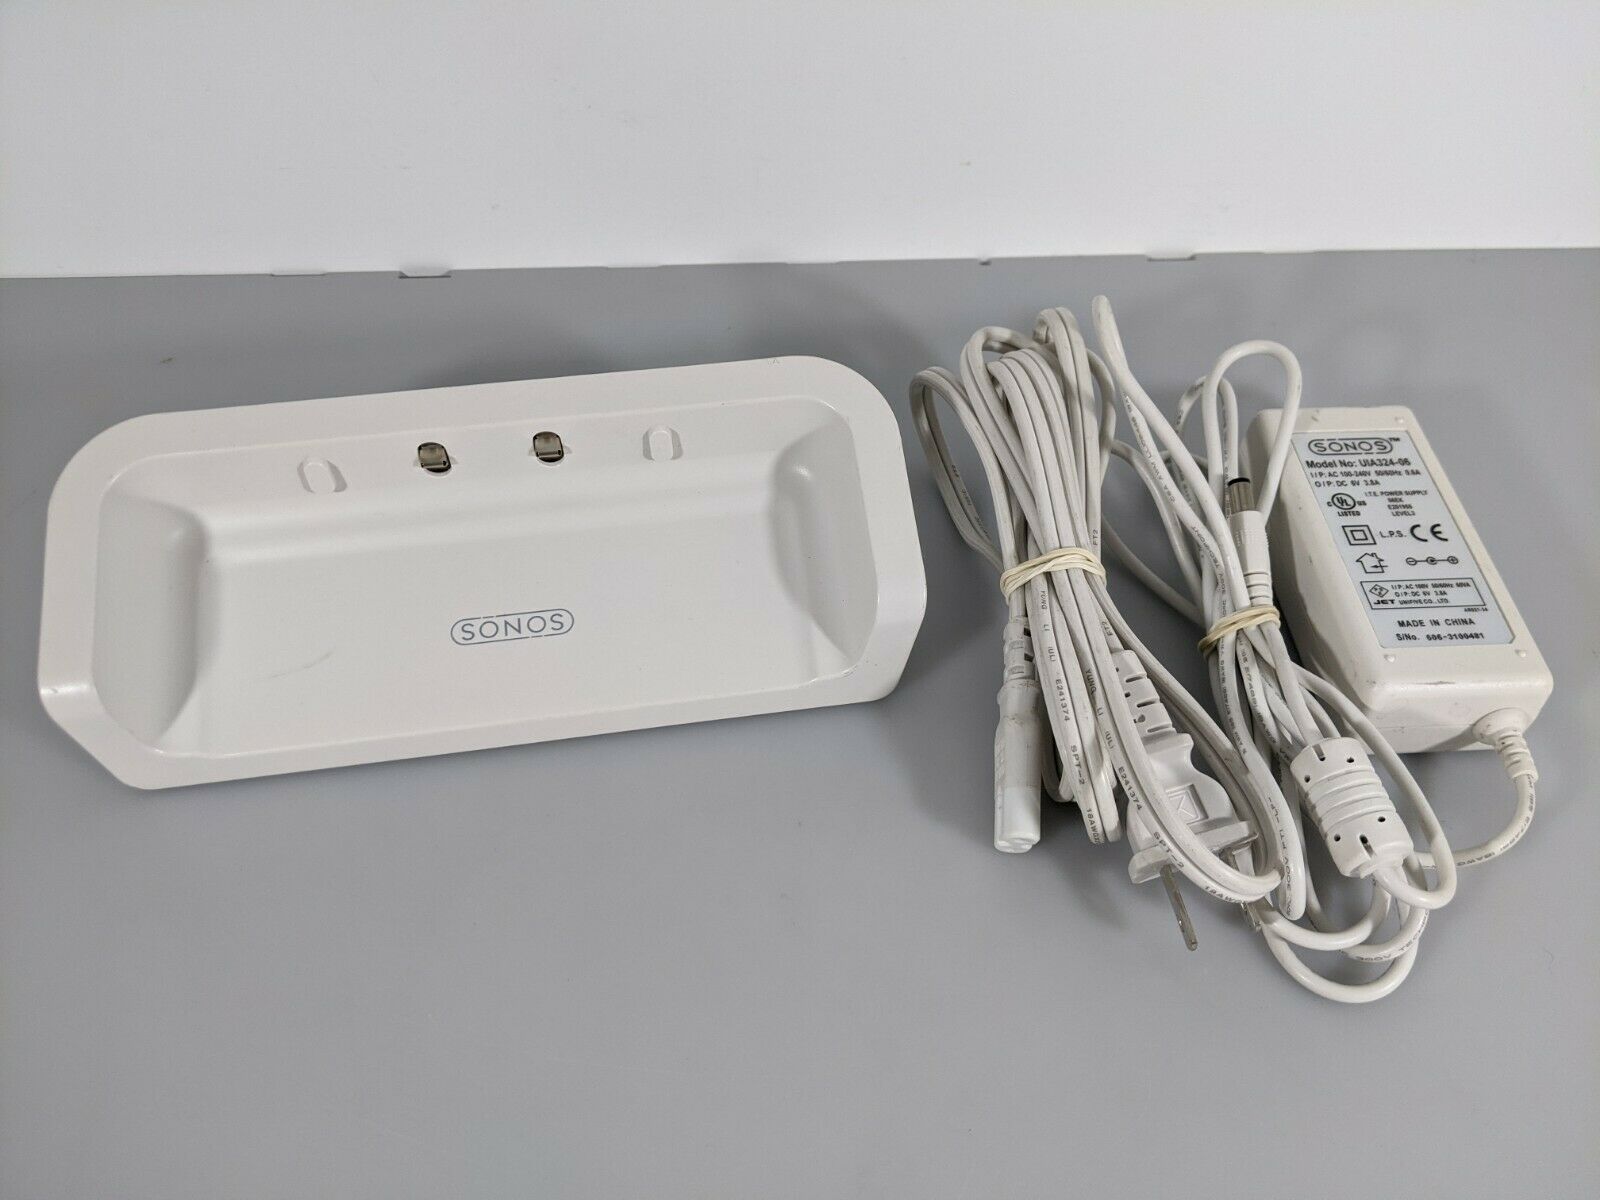 Original Genuine Sonos 0615 DOCK AC adapter Power Supply UIA324-06 TESTED charger Brand: Sonos Type: Audio Dock ac - Click Image to Close